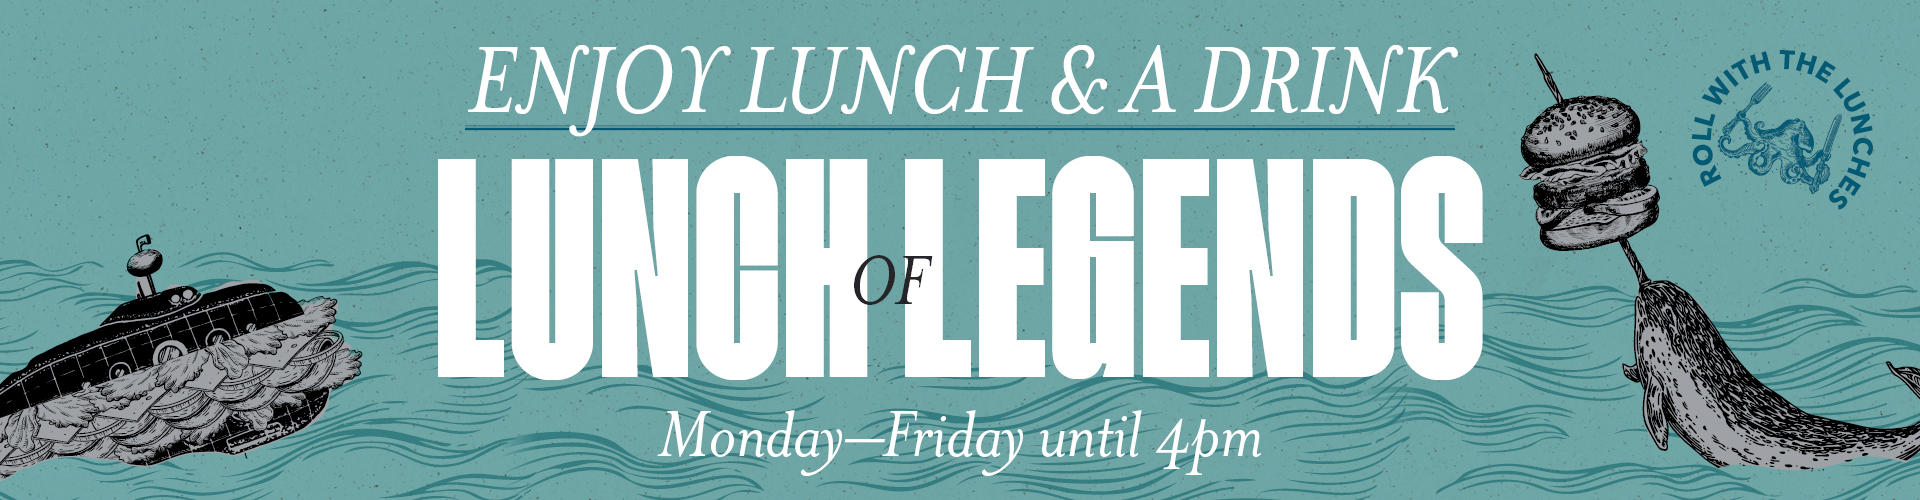 Lunch and a drink offers in London | The Bell